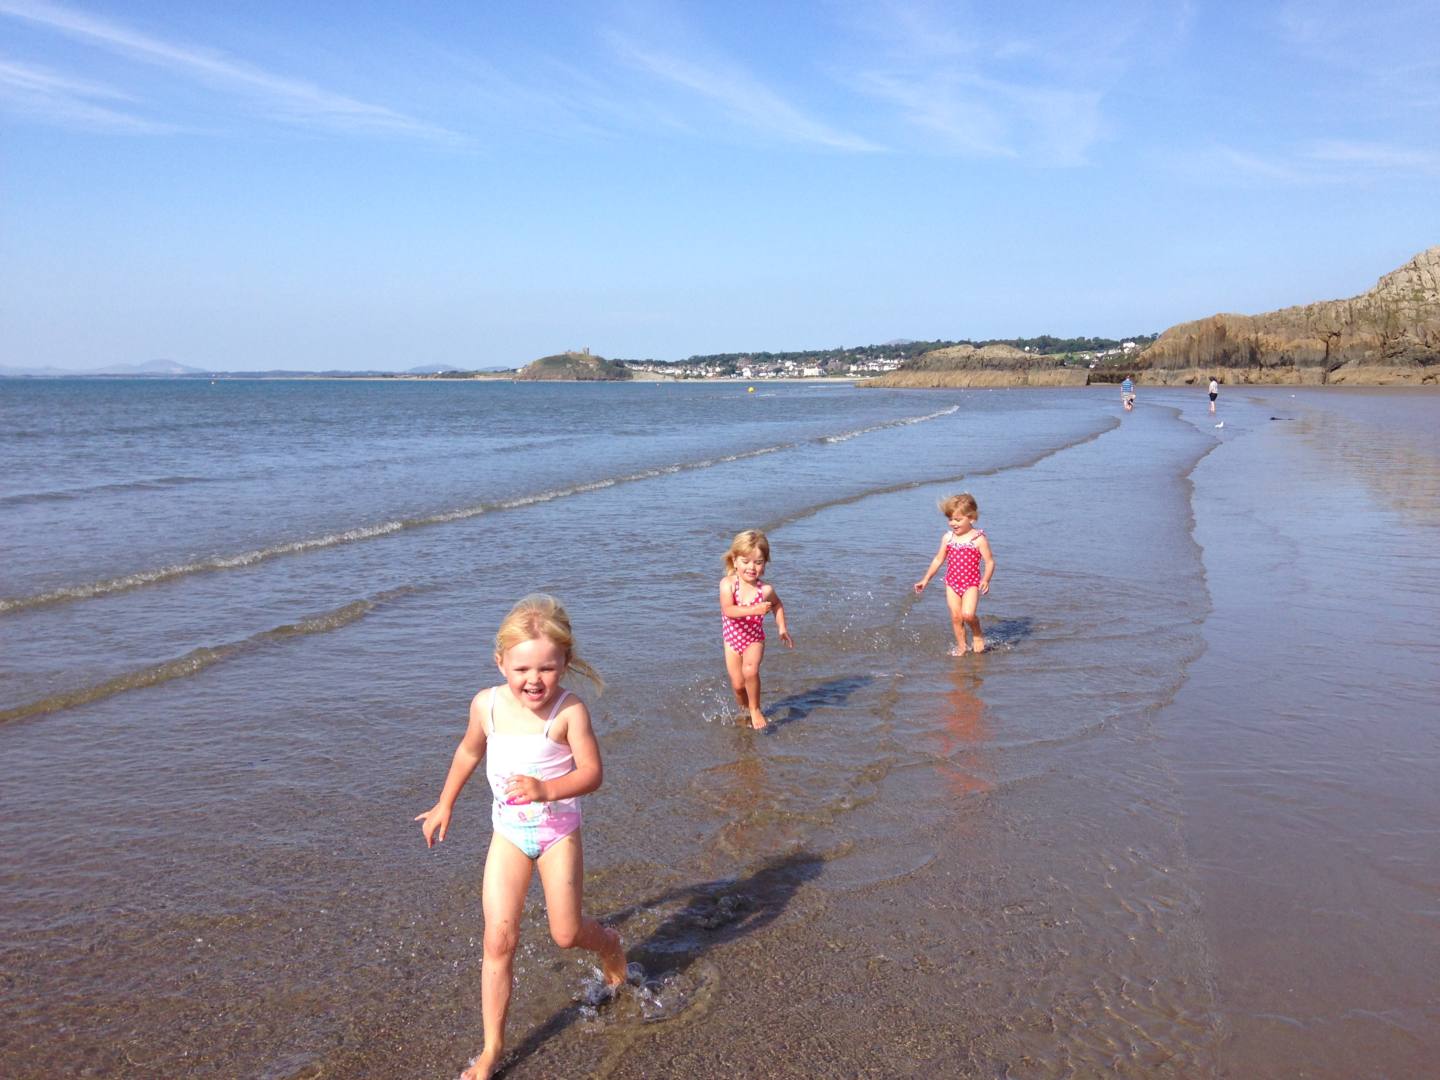 Wales If you are thinking of traveling to Abersoch or Pwhelli this summer, here are 5 Free Days Out for Kids Near Abersoch to consider.